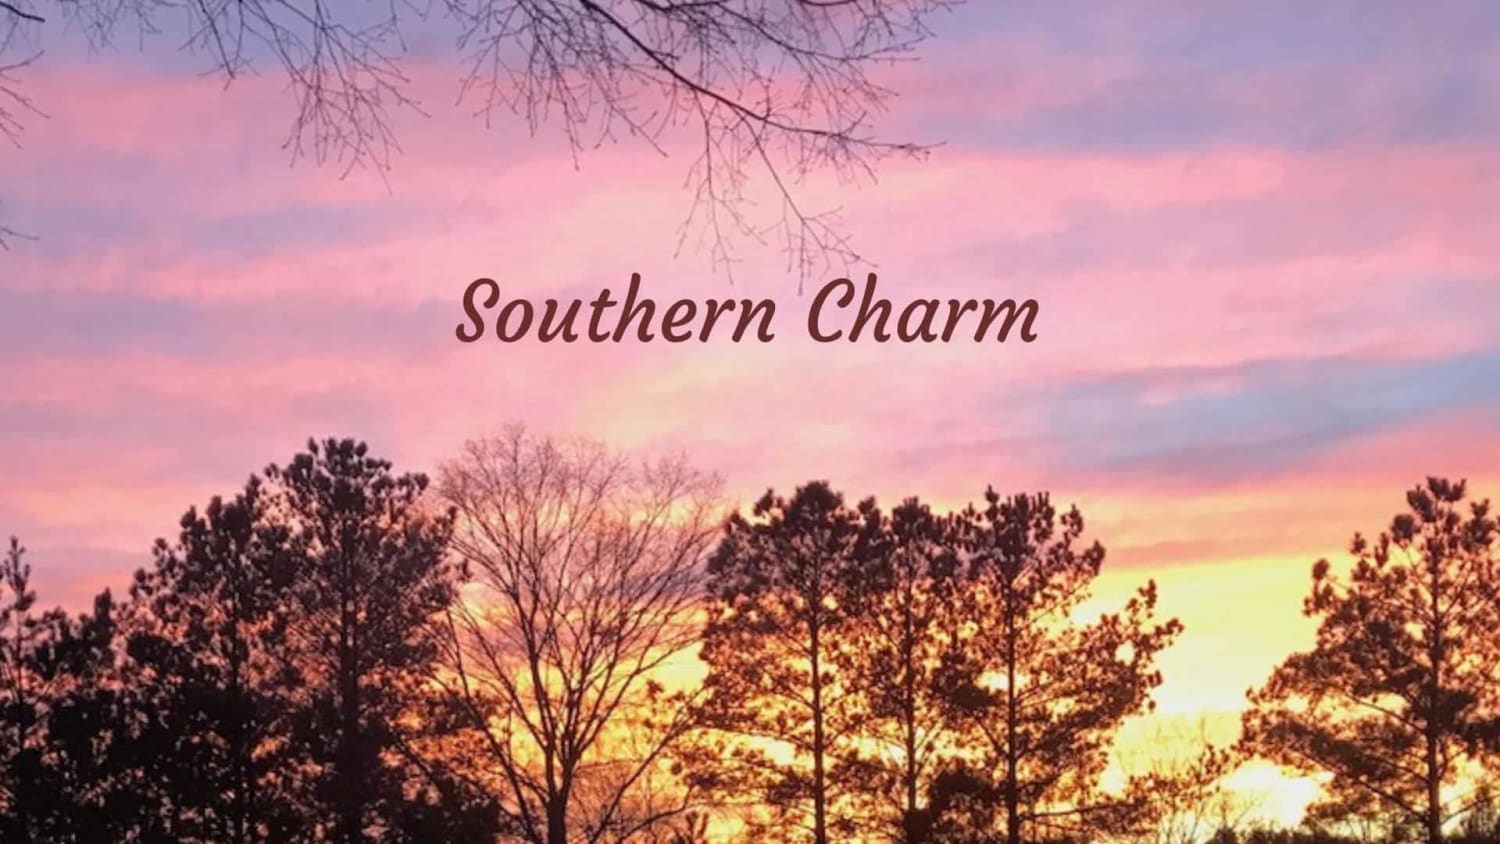 Southern Charm - Life in the South